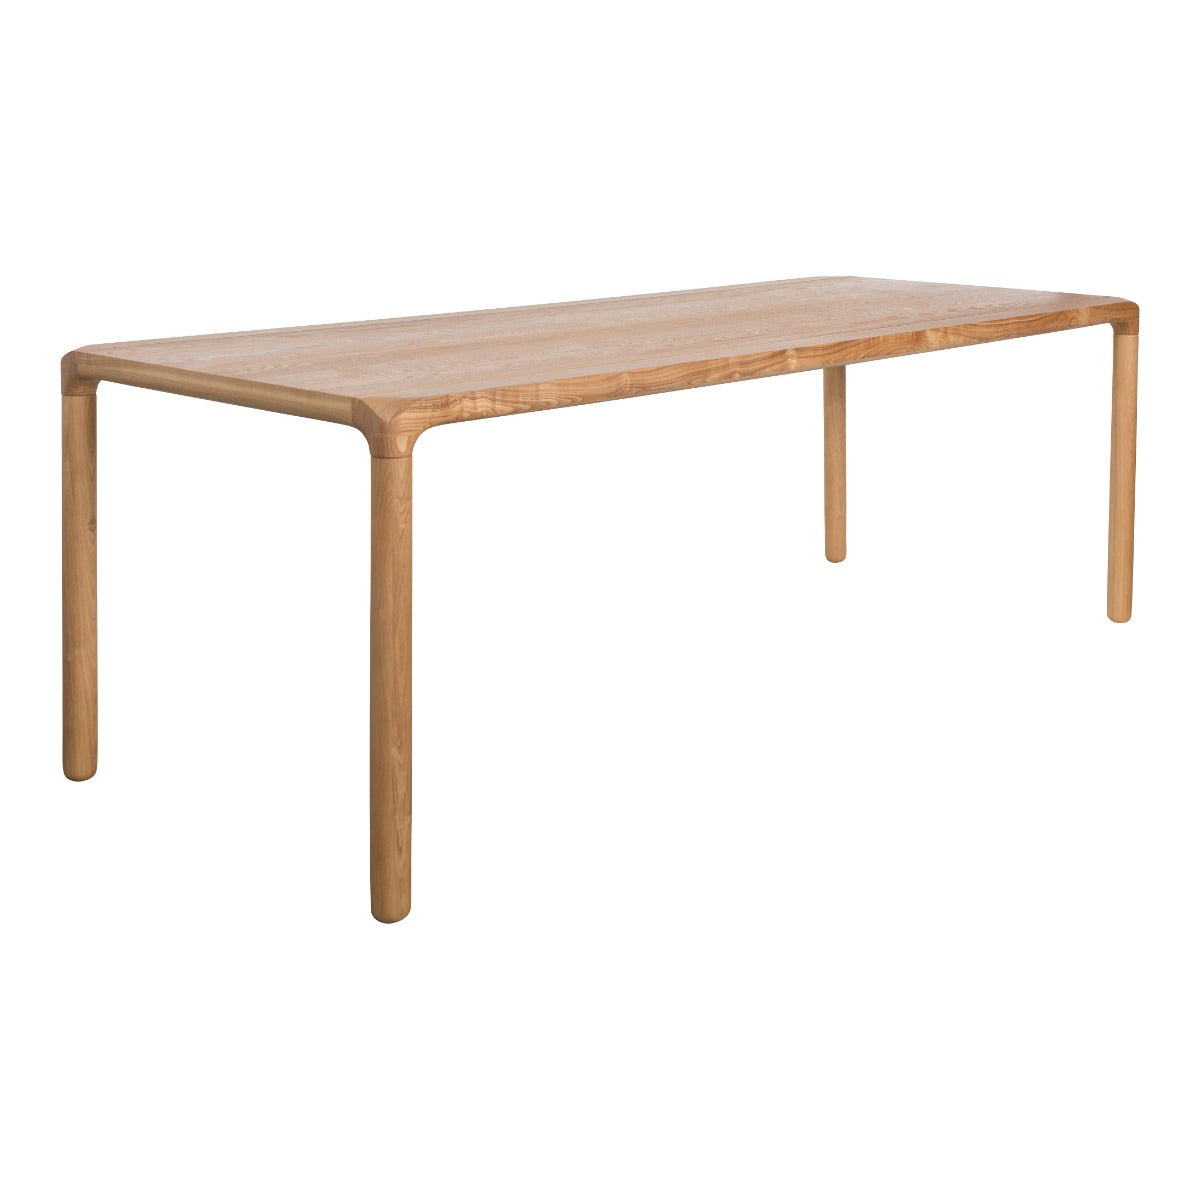 STORM 220x90 wooden table